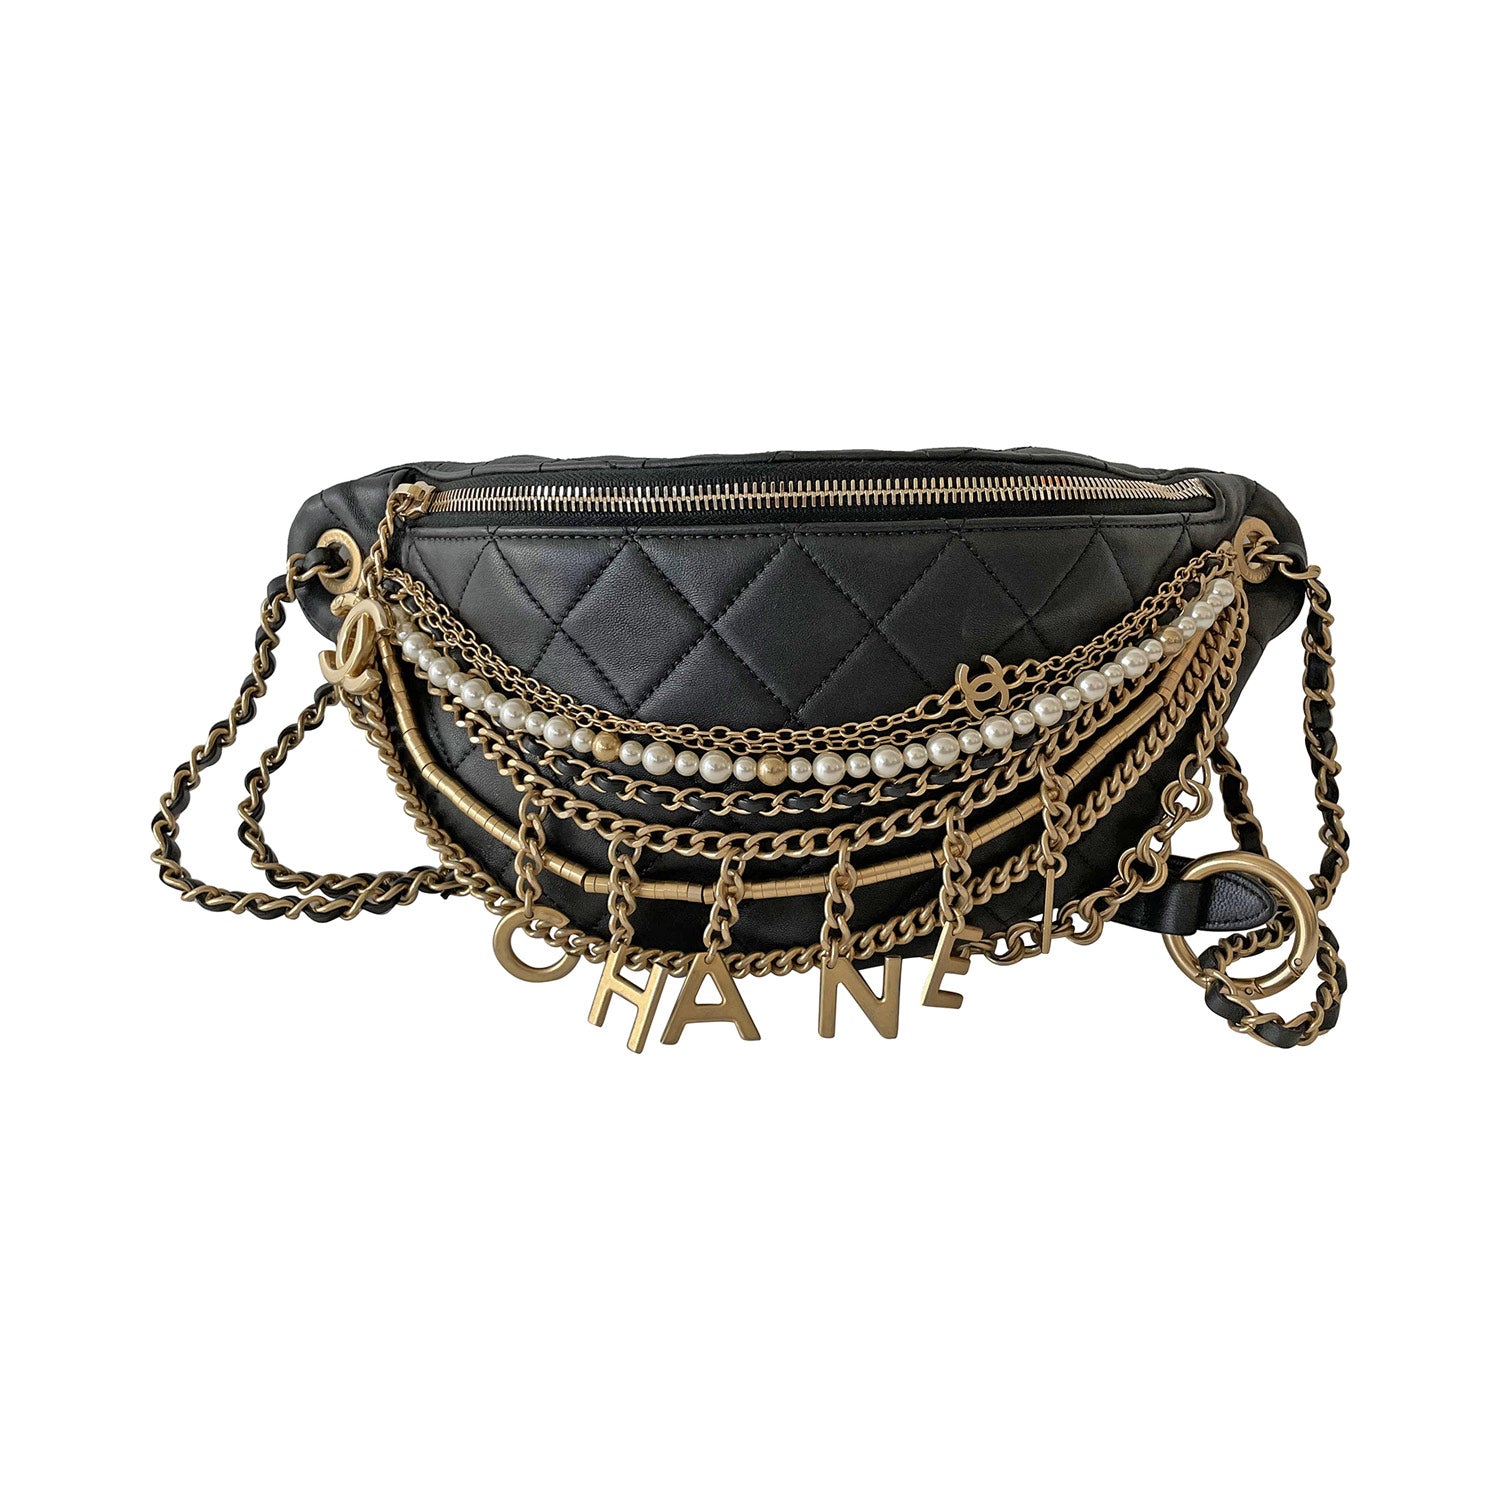 CHANEL Lambskin Quilted All About Chains Waist Belt Bag Black